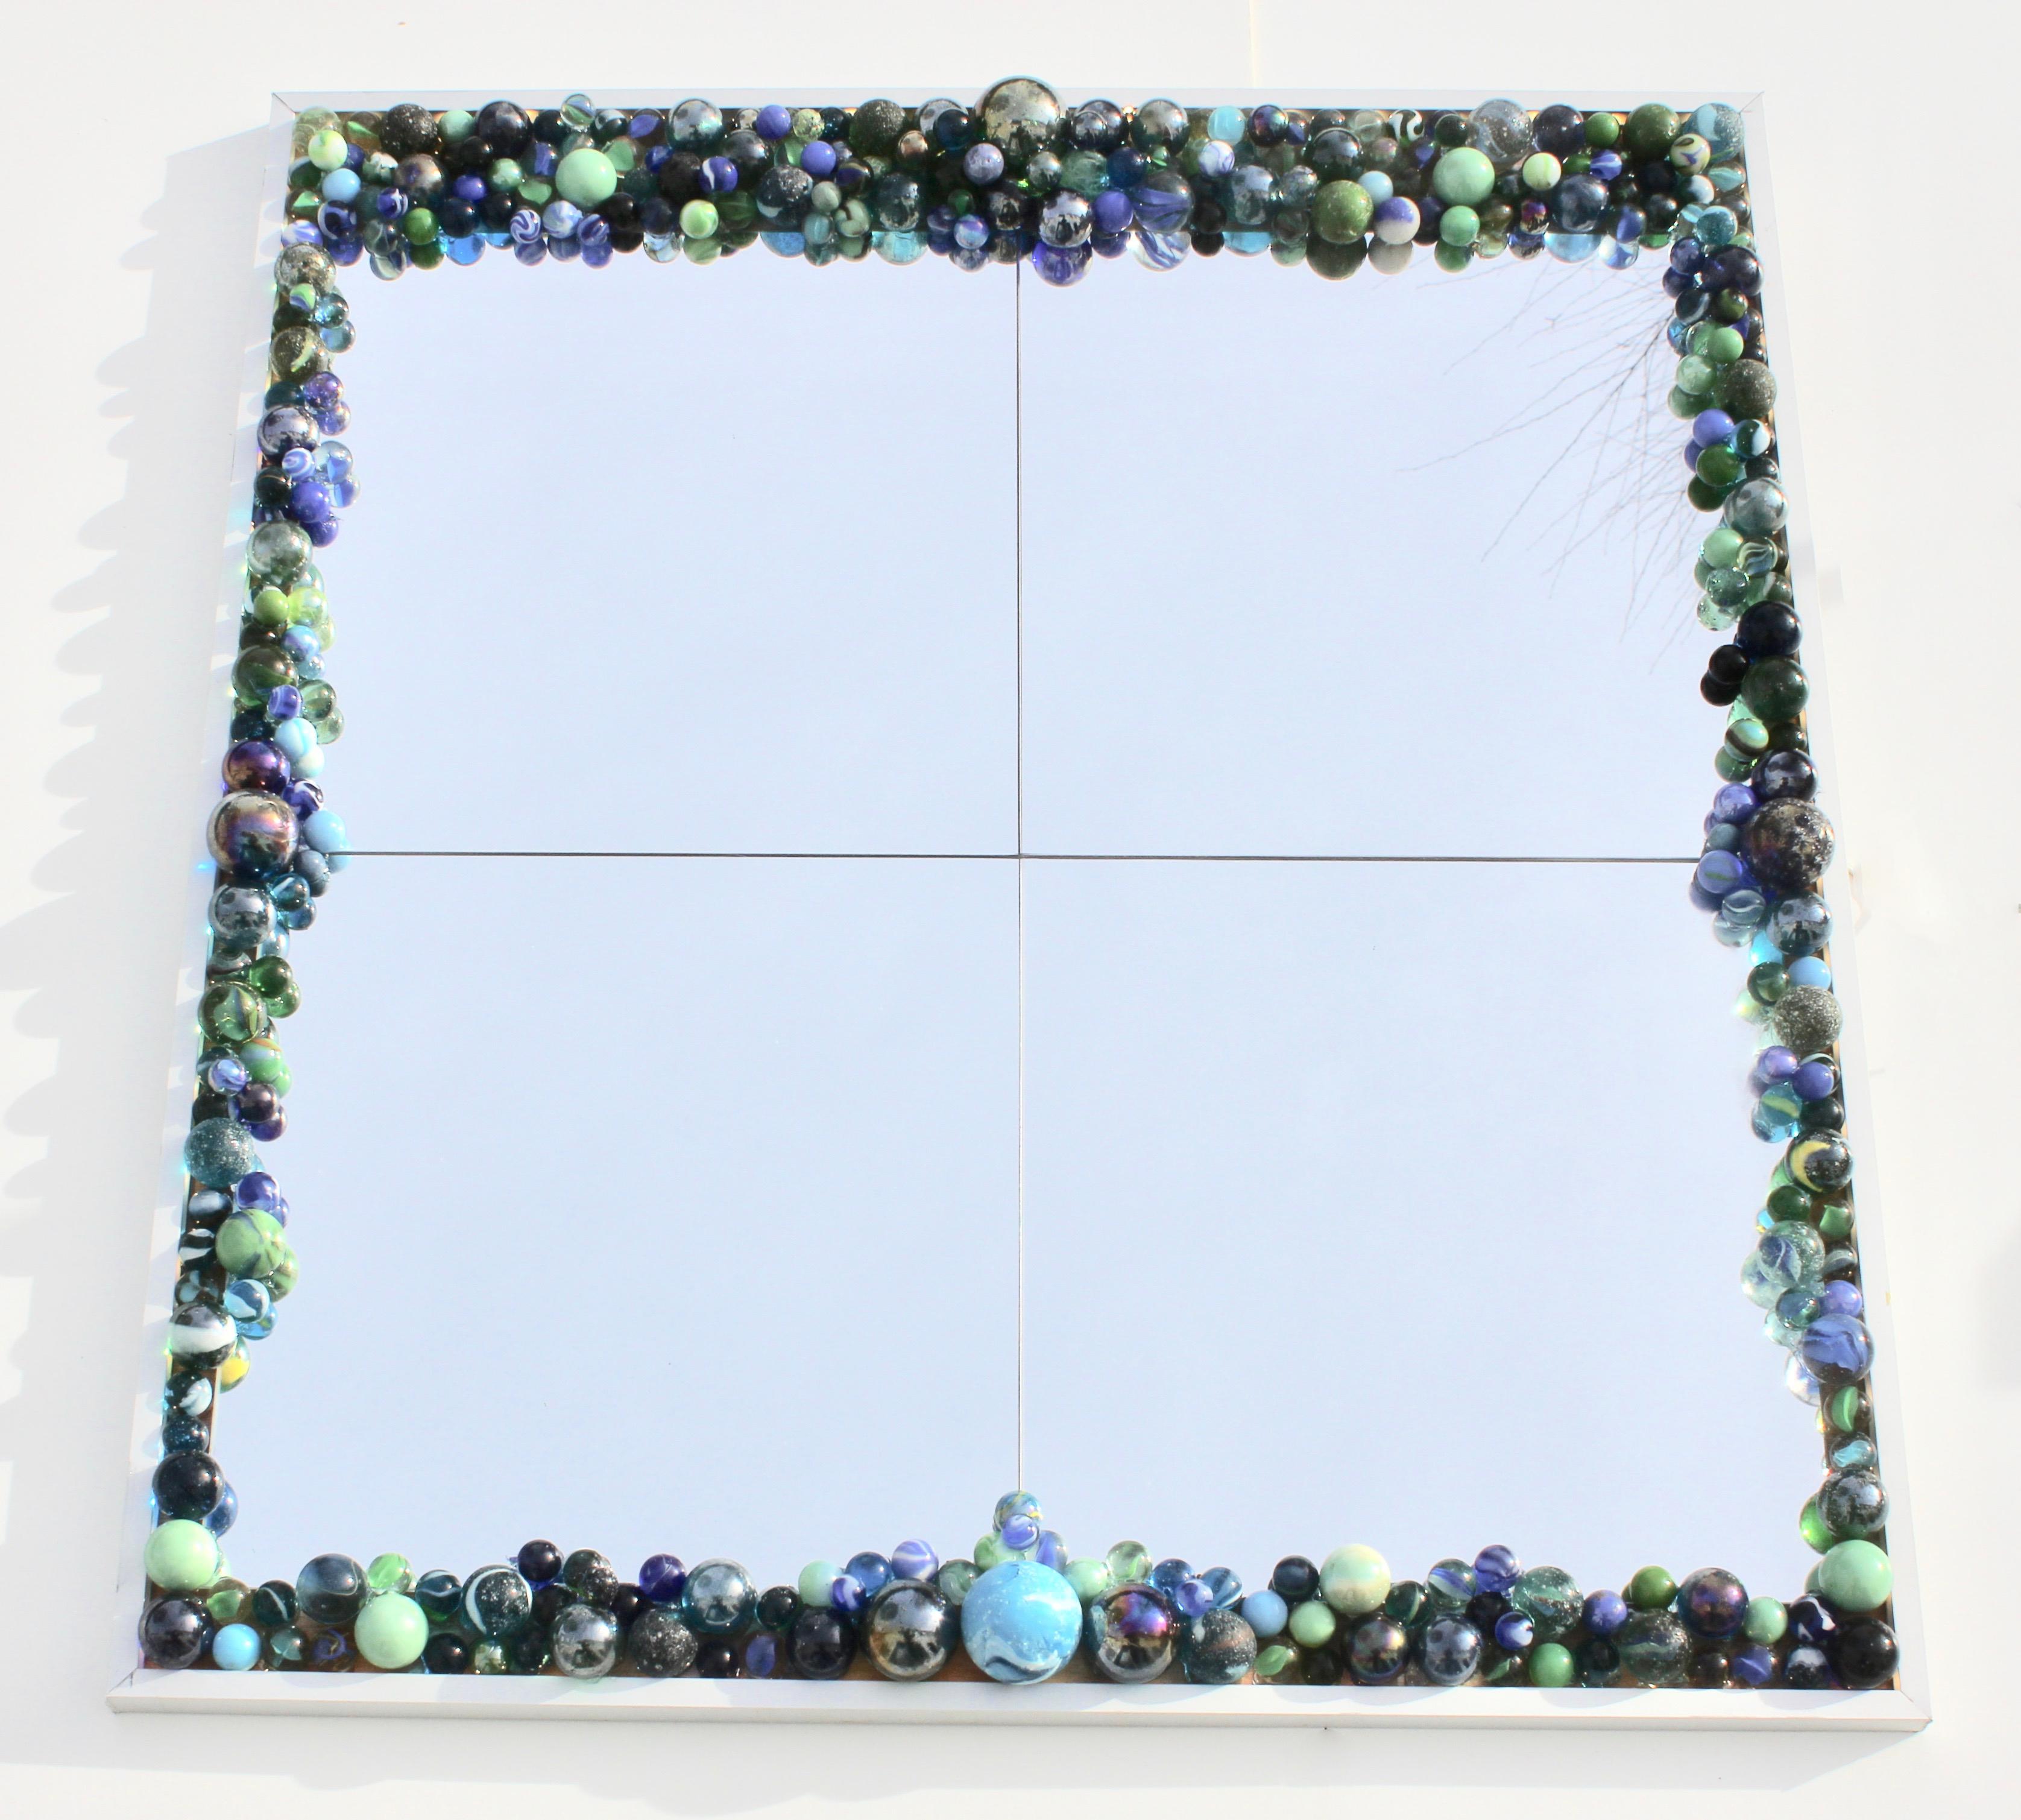 This stylish wall mirror has an LED light in the aluminum frame which illuminates the border of blue and green marbles. The impact and colors change dramatically according to the ambient (direction of sun) light and in the evening, the illuminated